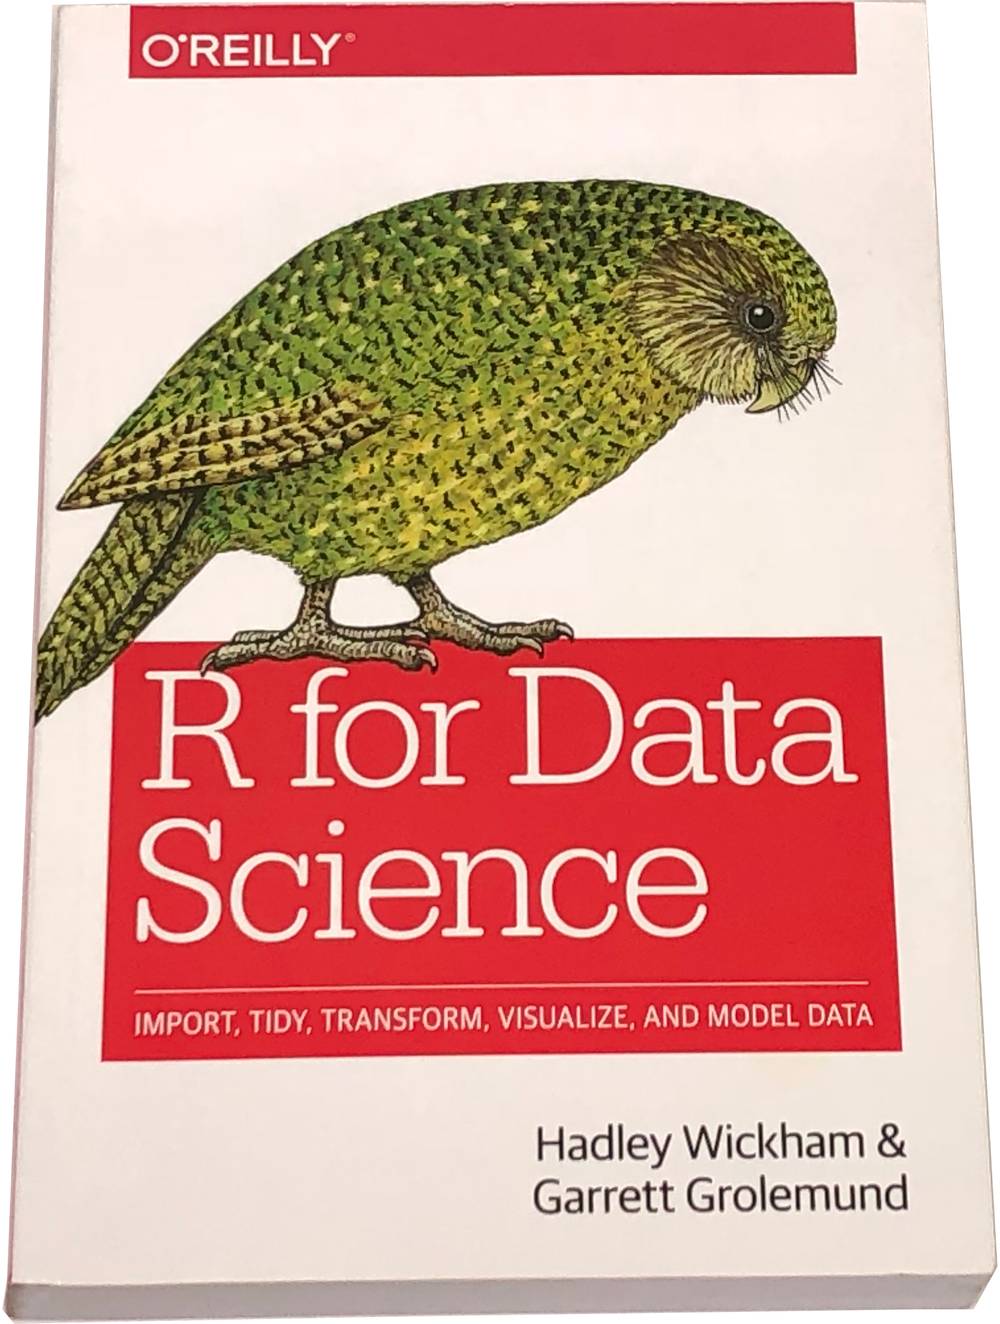 Book image of R for Data Science.